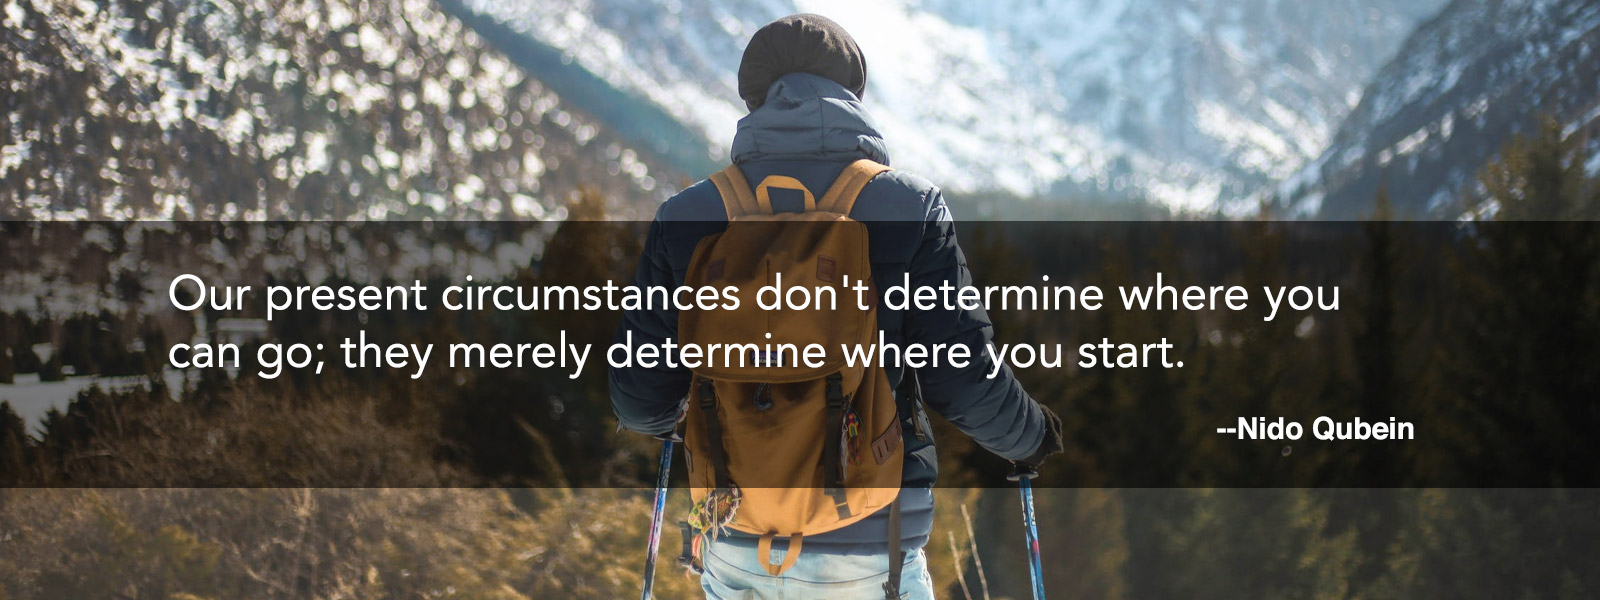 Our present circumstances don't determine where you can go; they merely determine where you start.